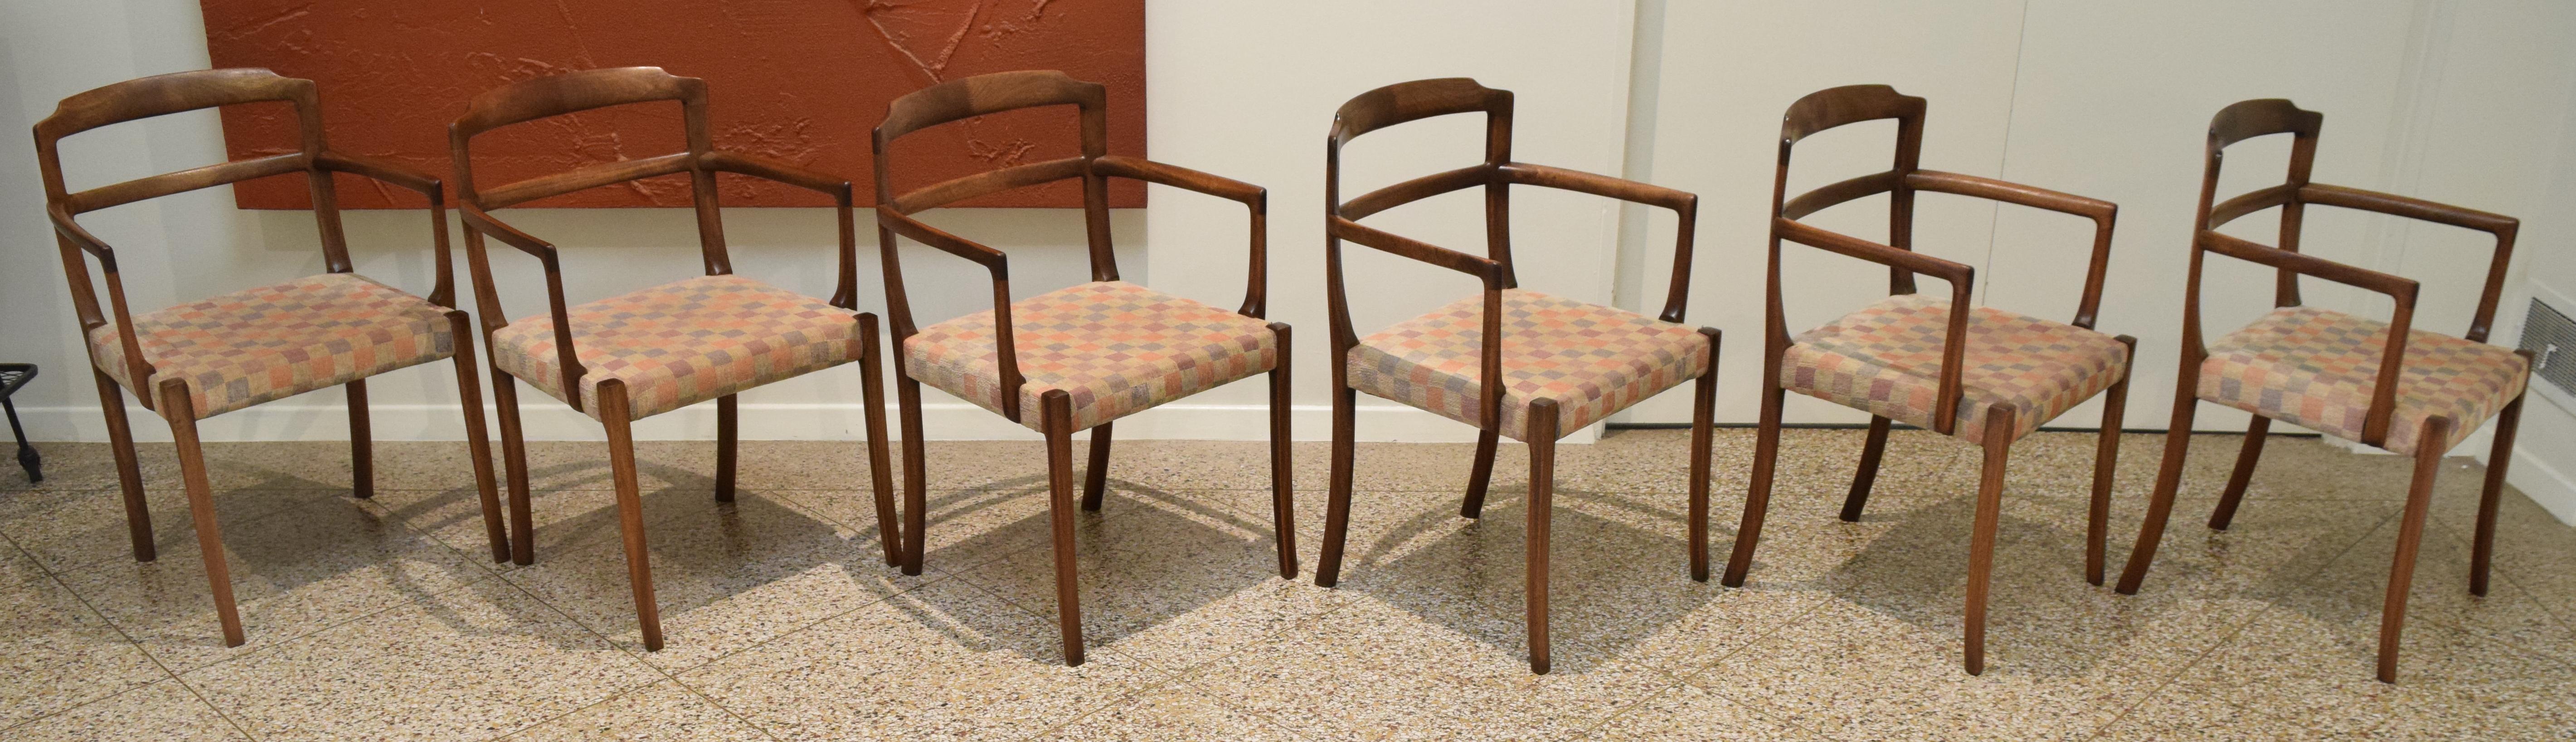 Sculpted Chairs by Ole Wanscher im Angebot 4